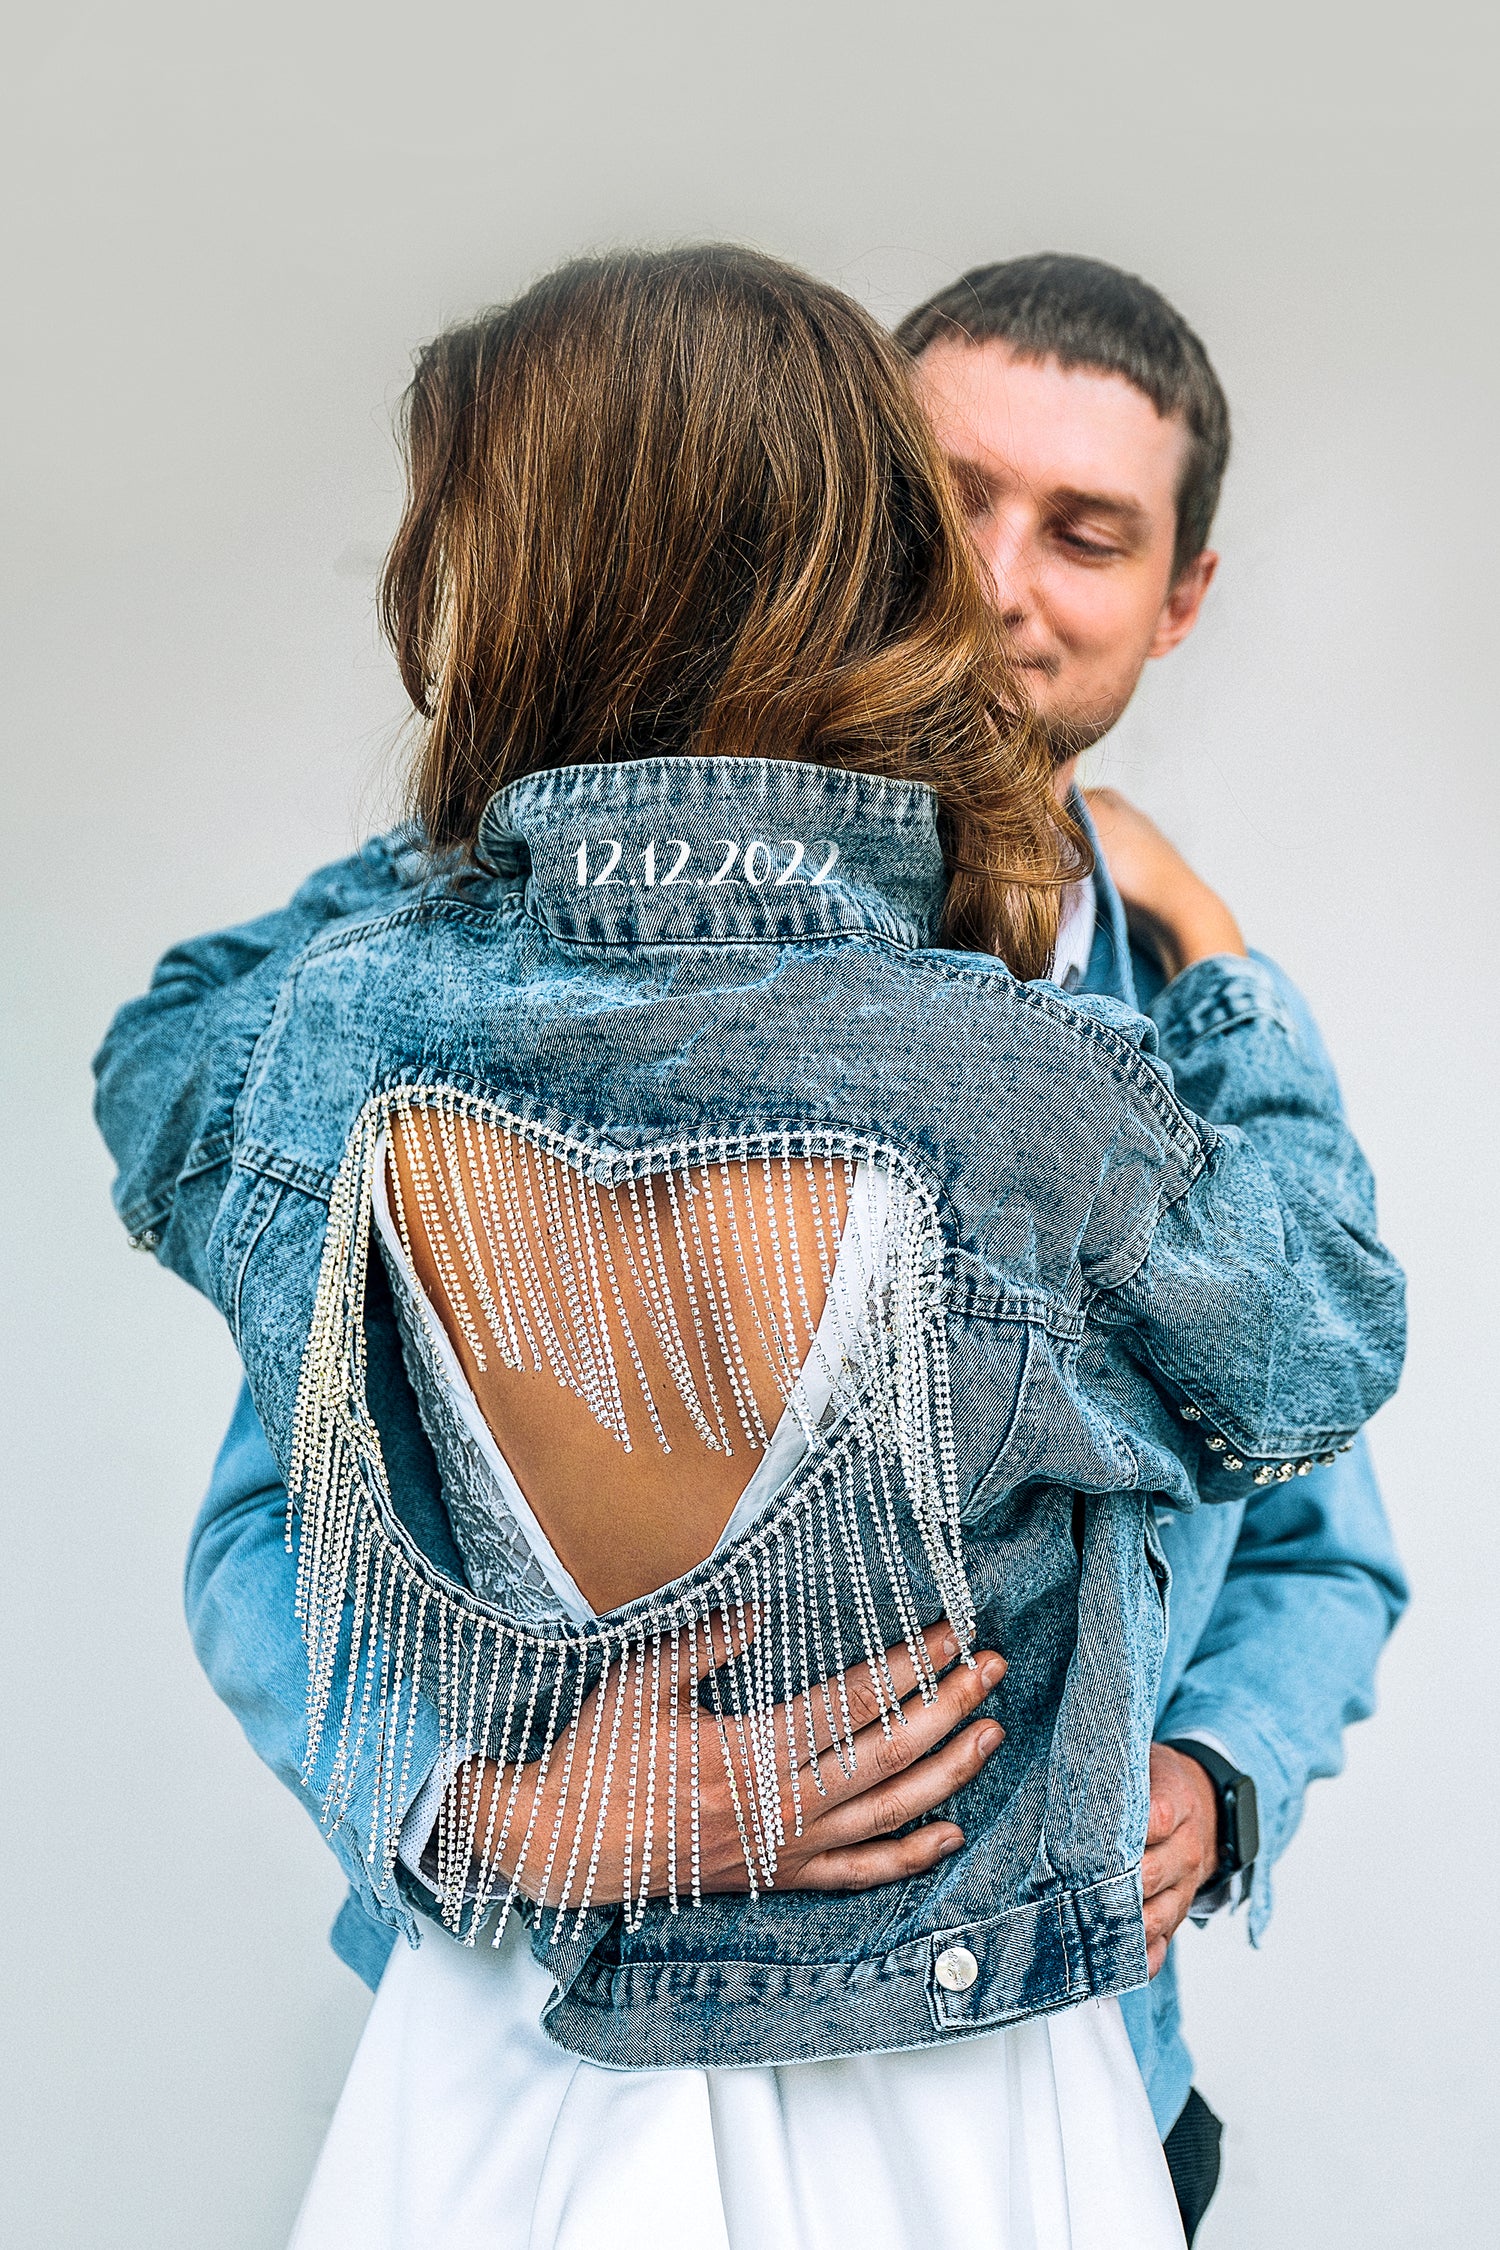 Make Your Wedding Day Extra Special with Custom Bridal Denim Jackets